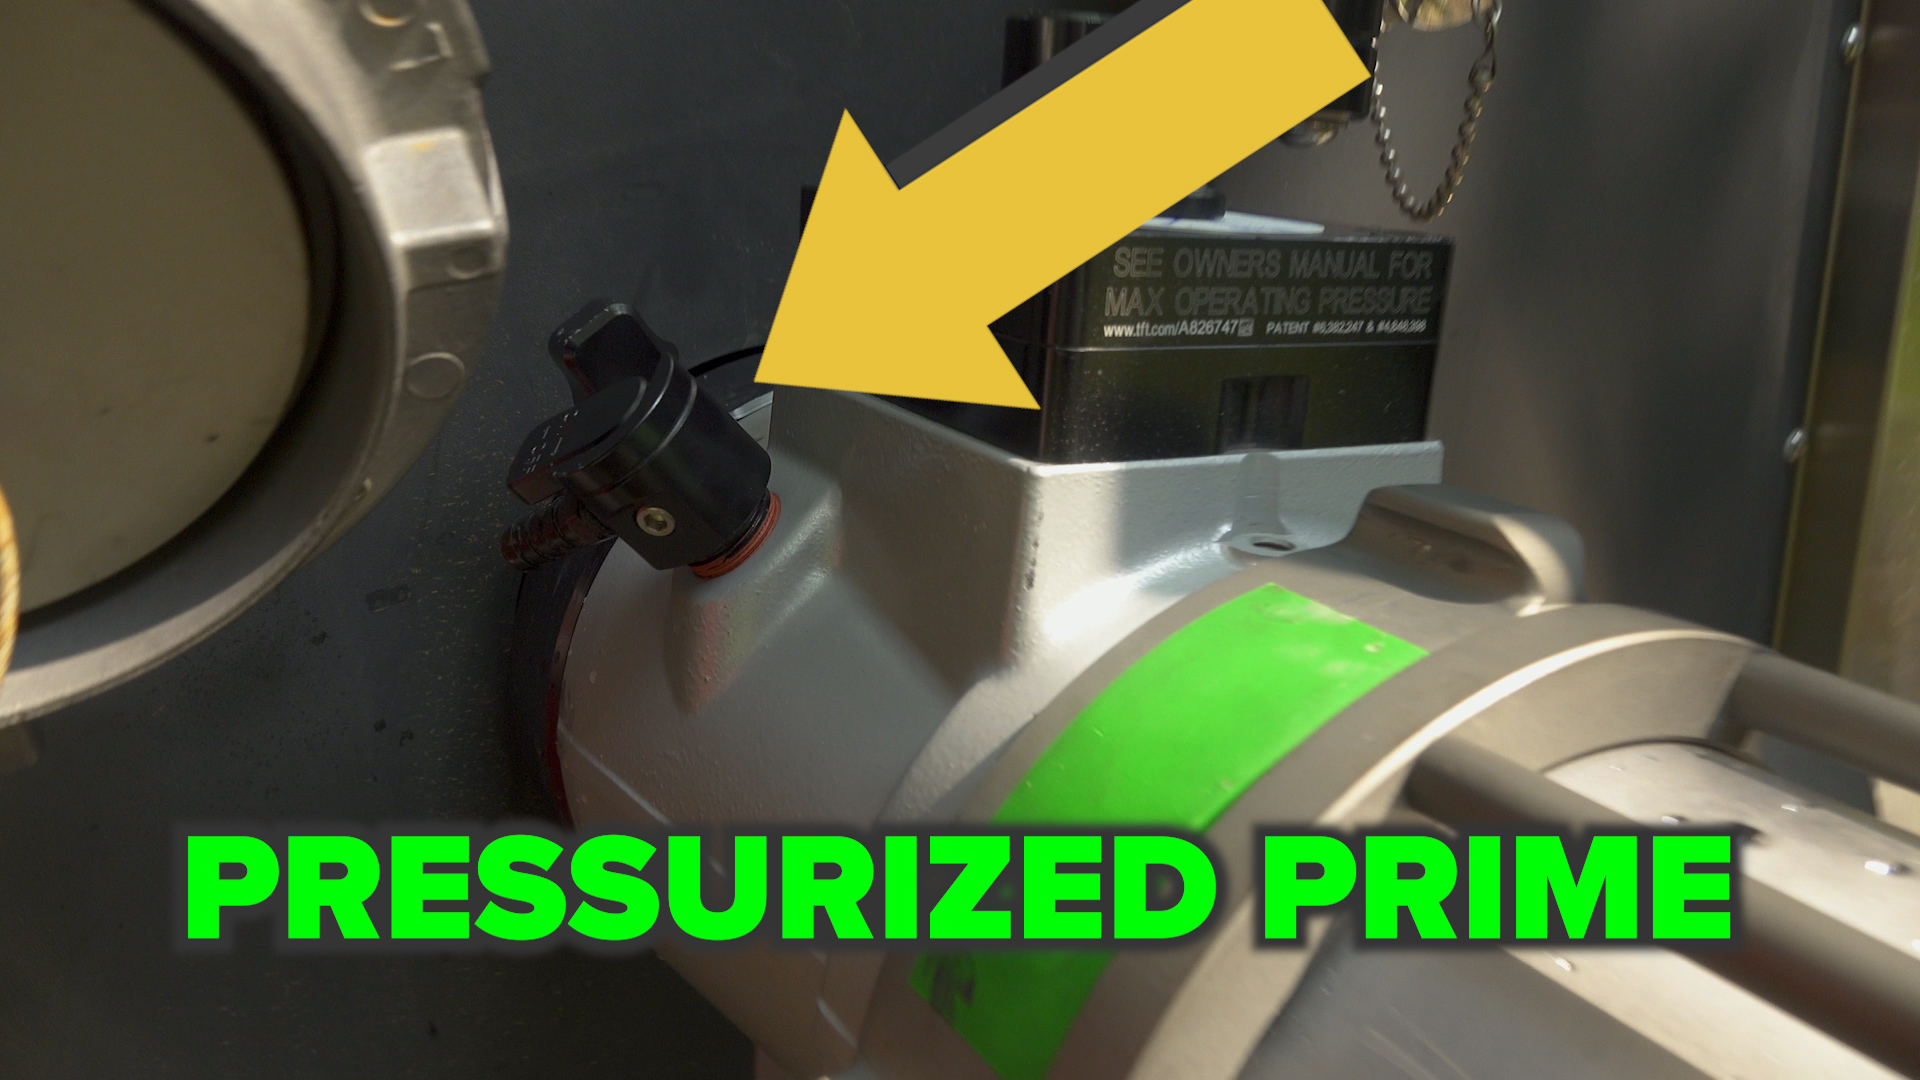 How to Execute Pressurized Prime